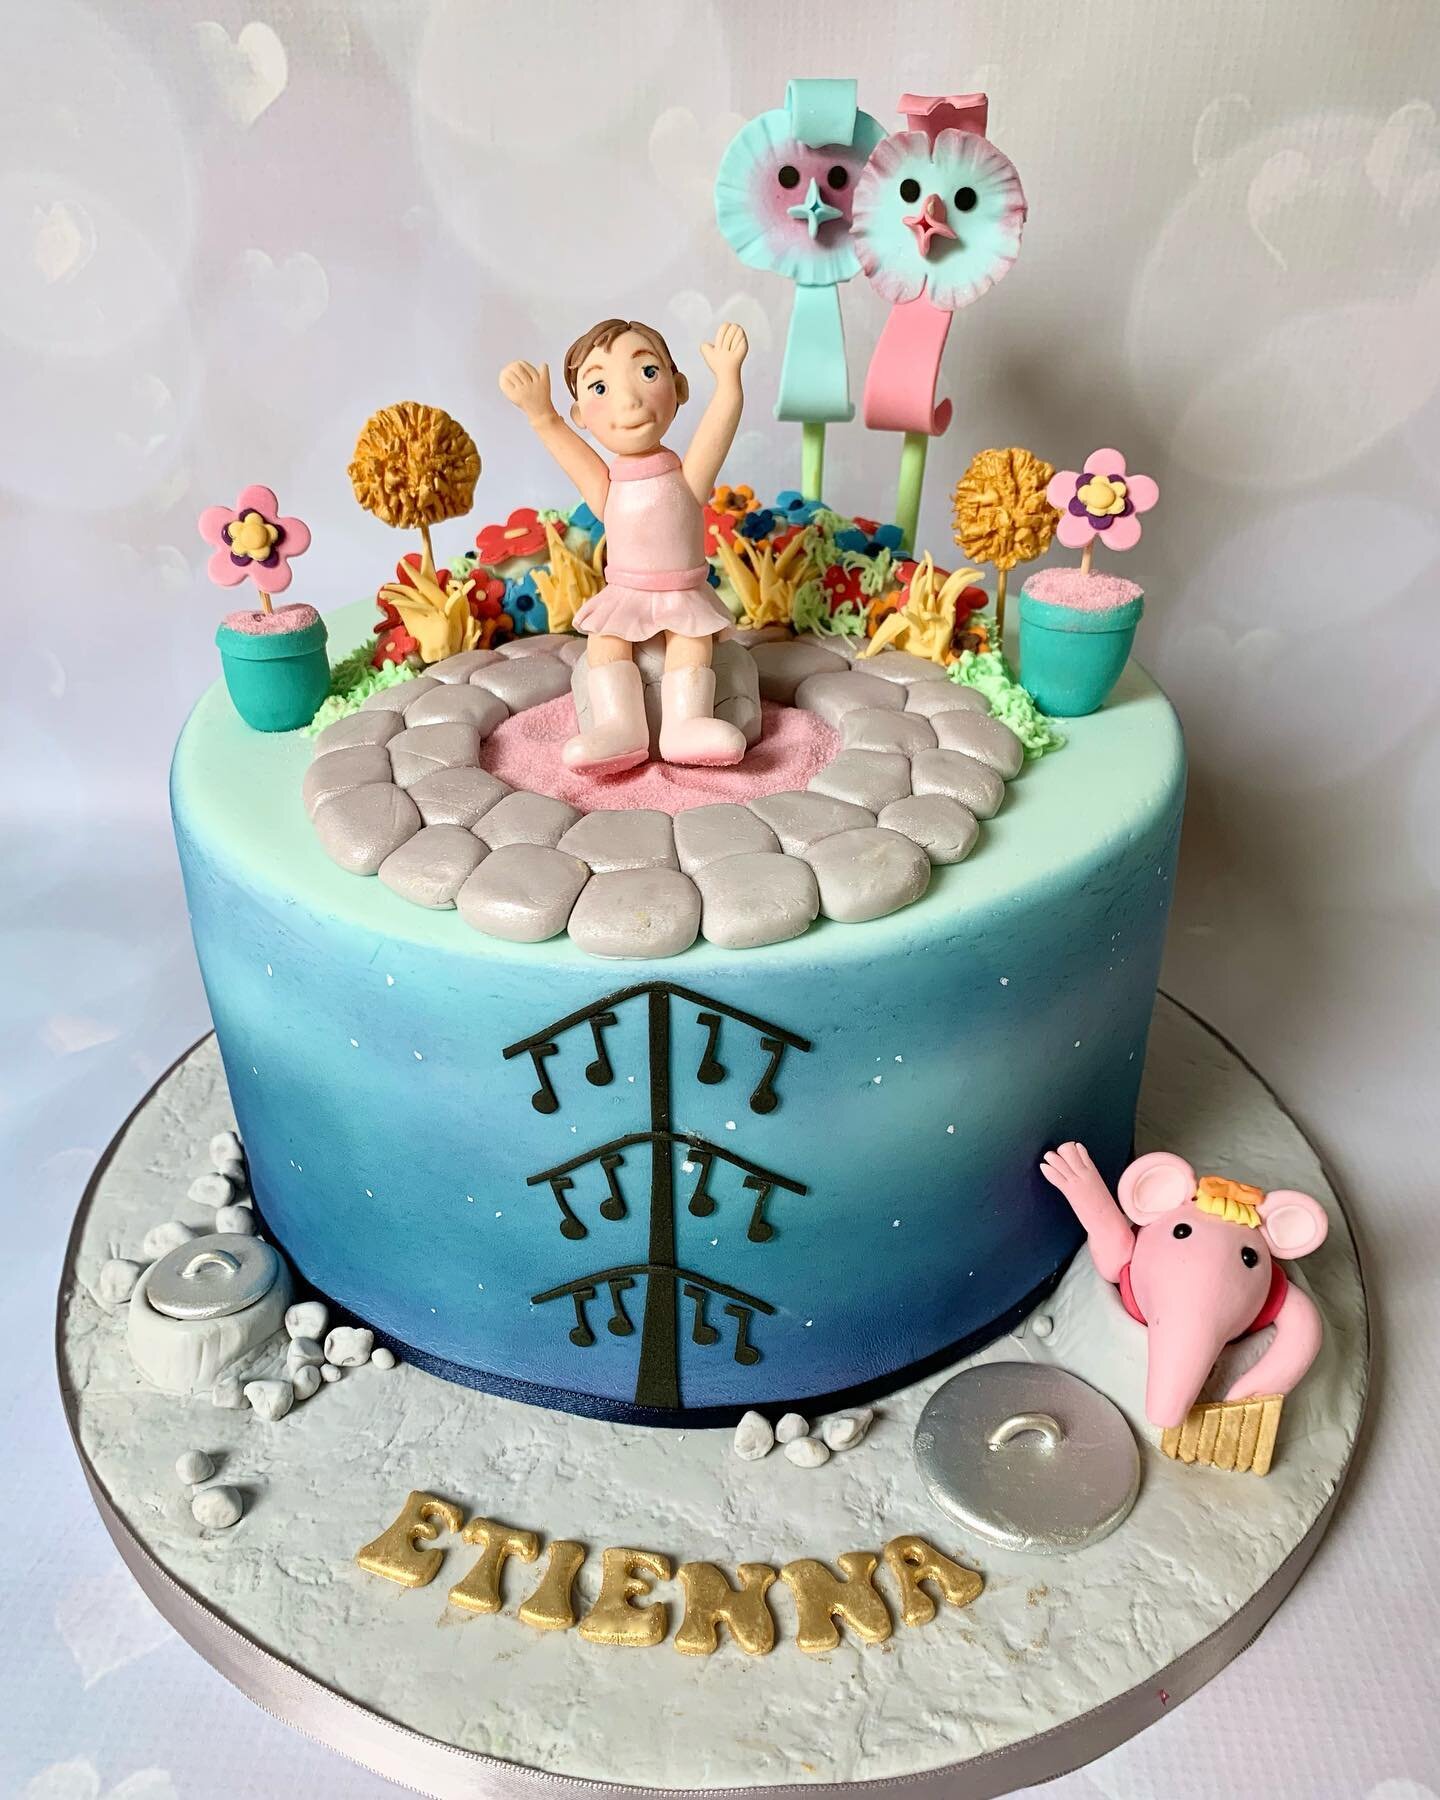 A Clangers themed cake for little Etiennas naming Ceremony. She is sat in Mother Clangers garden with music trees and singing flowers. Tiny Clanger also popping out with her pipe to say hello!
Have a wonderful day xxx
#theclangers #noveltycakes #chil